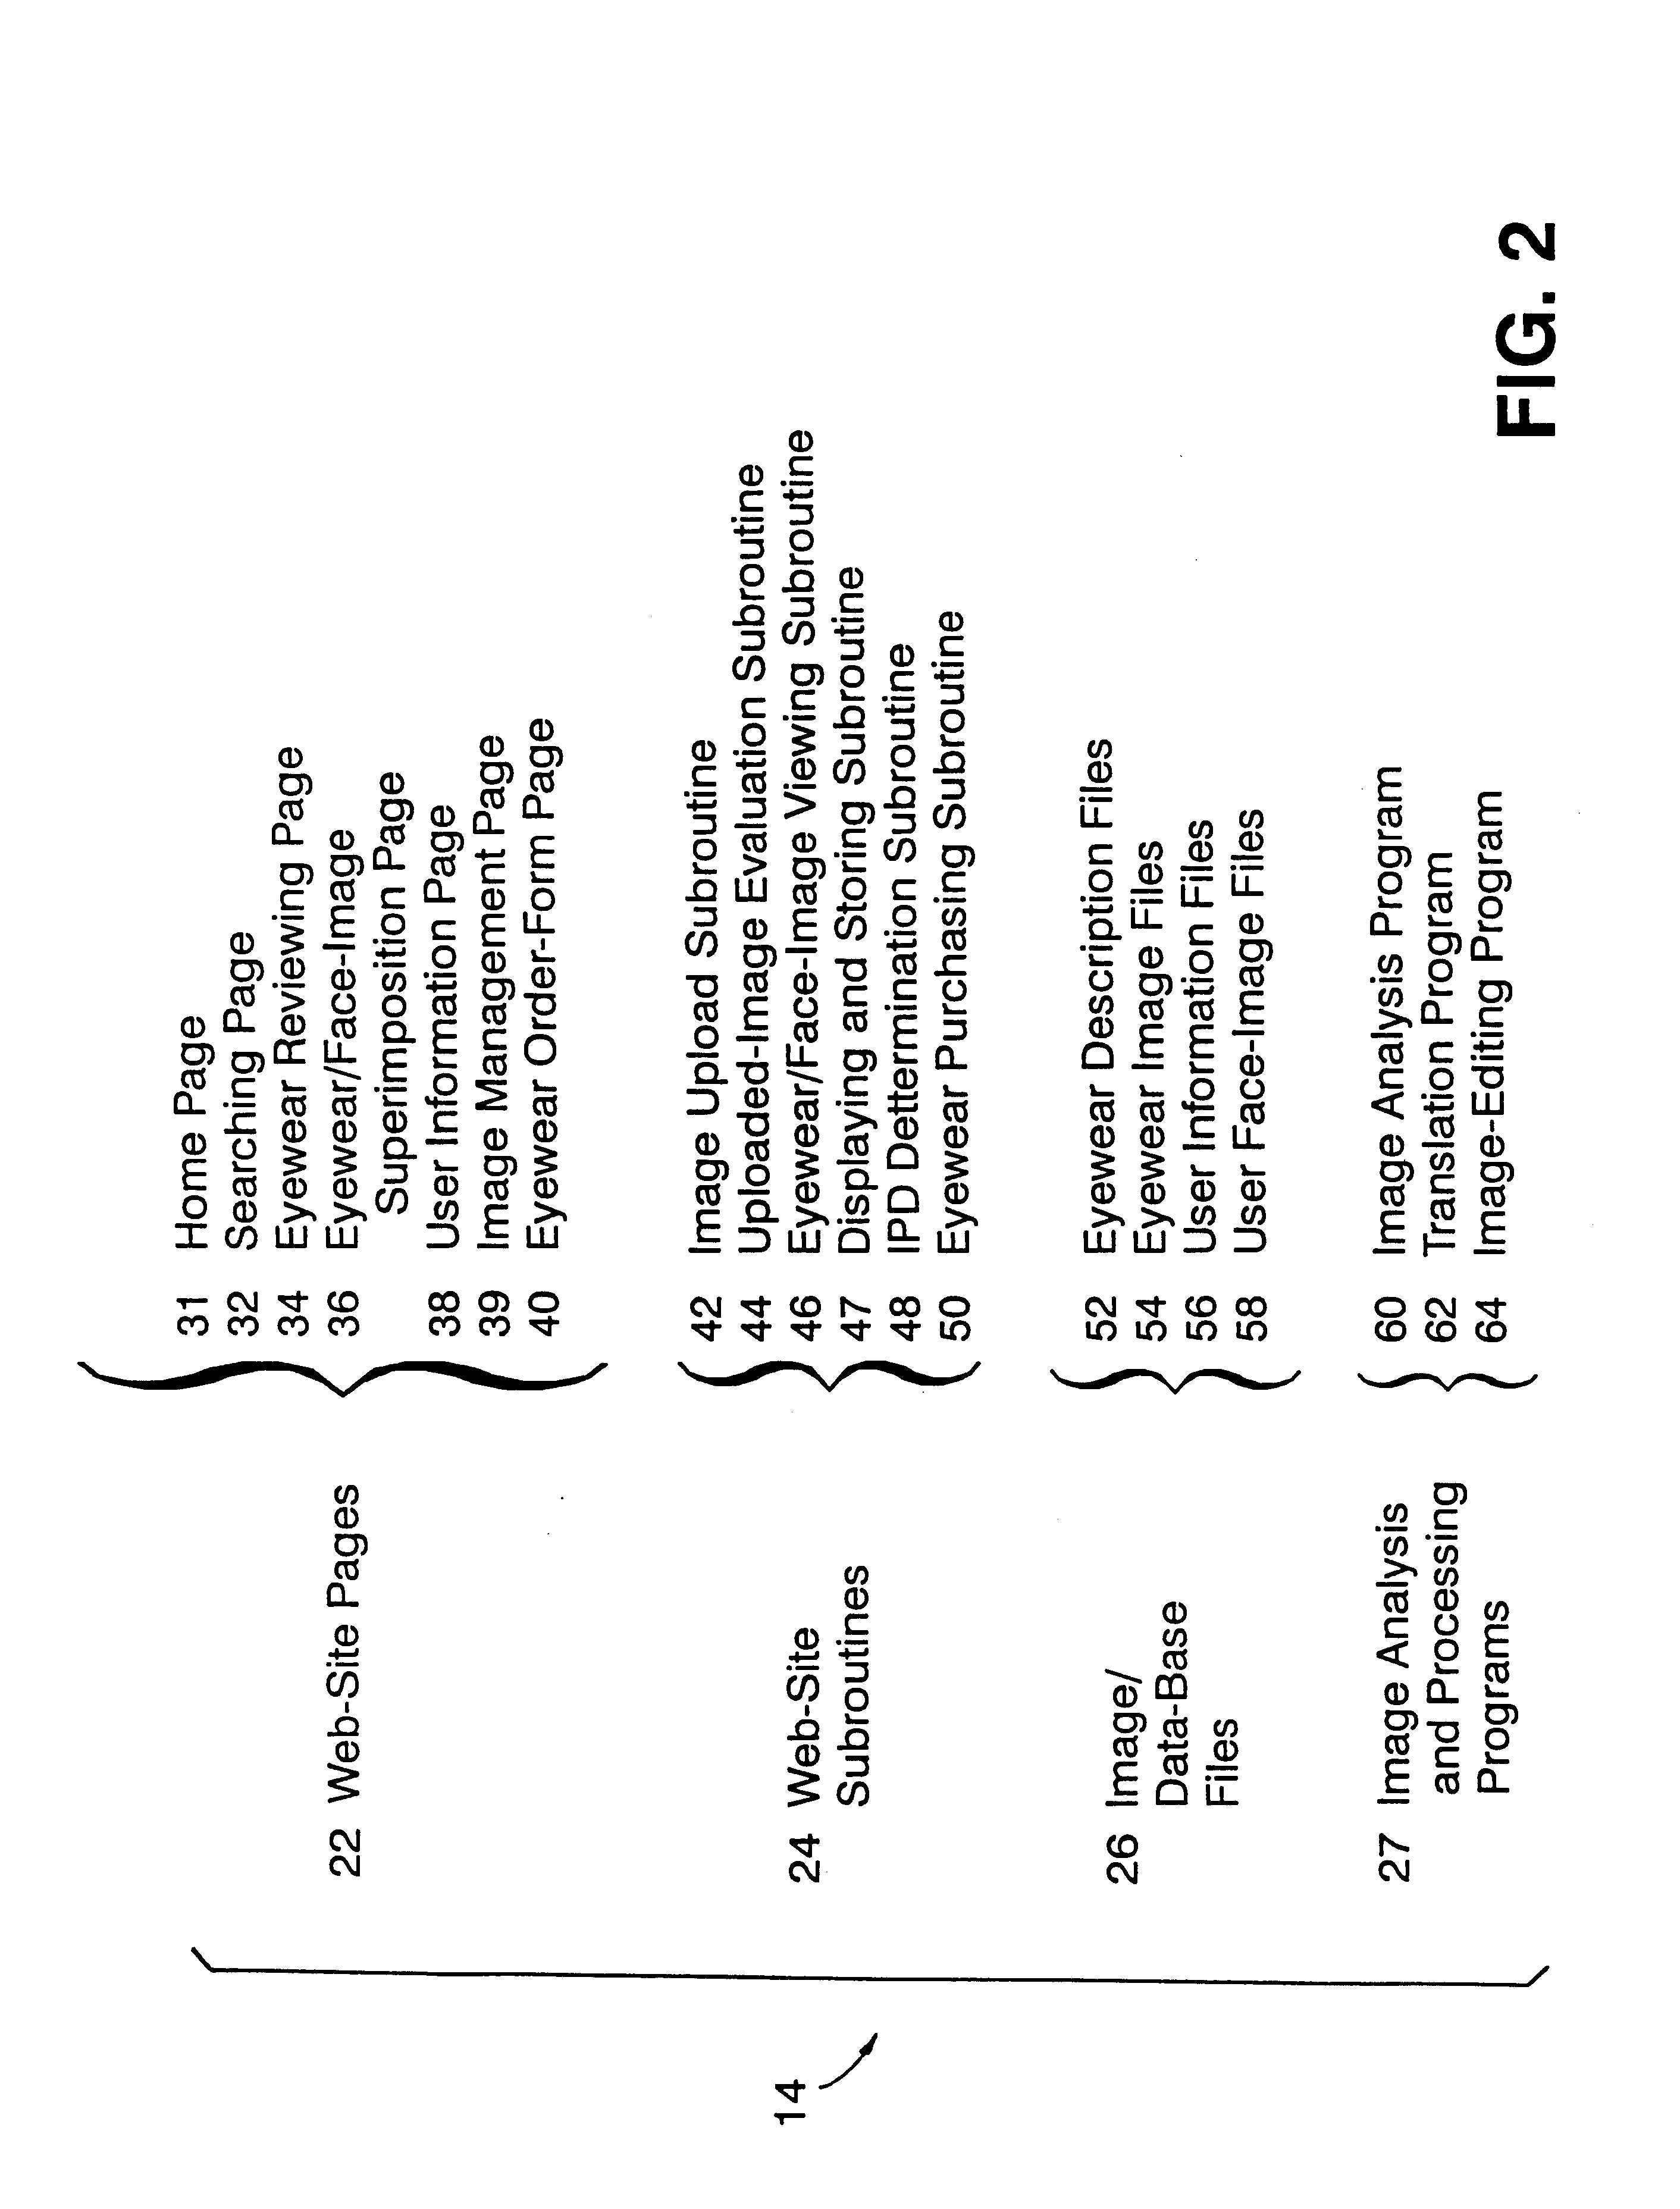 System and method for accurately displaying superimposed images